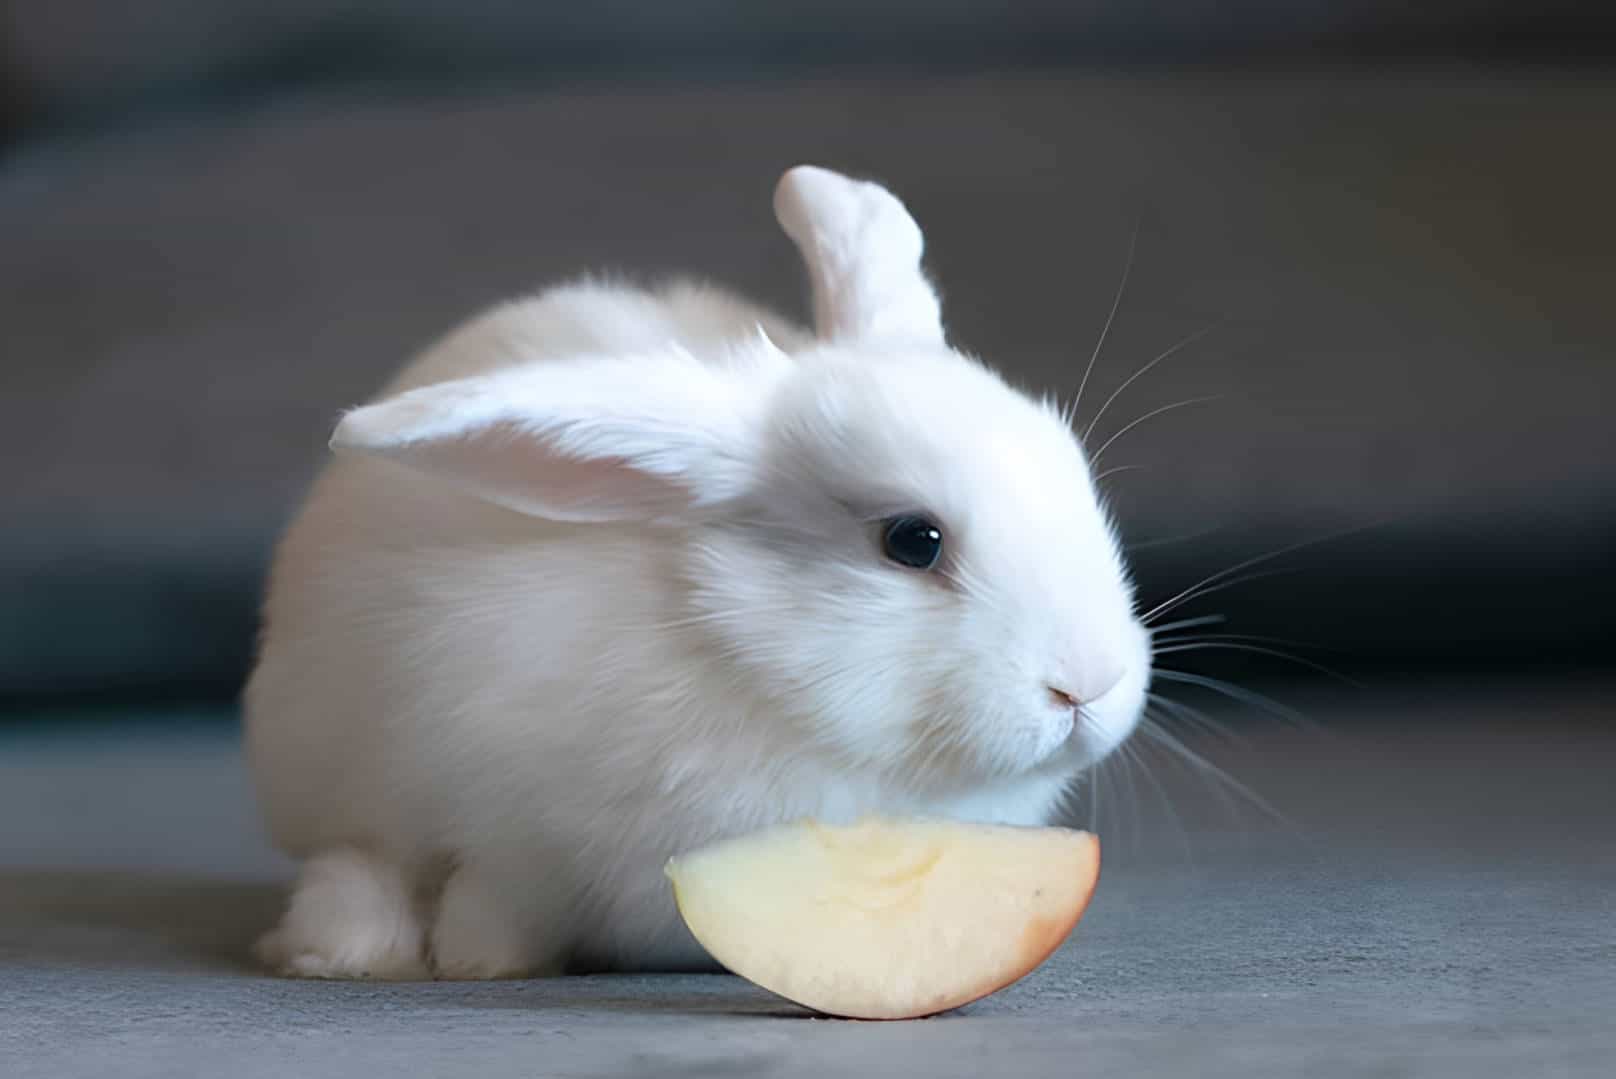 Beneficial contents of apple for rabbit’s health